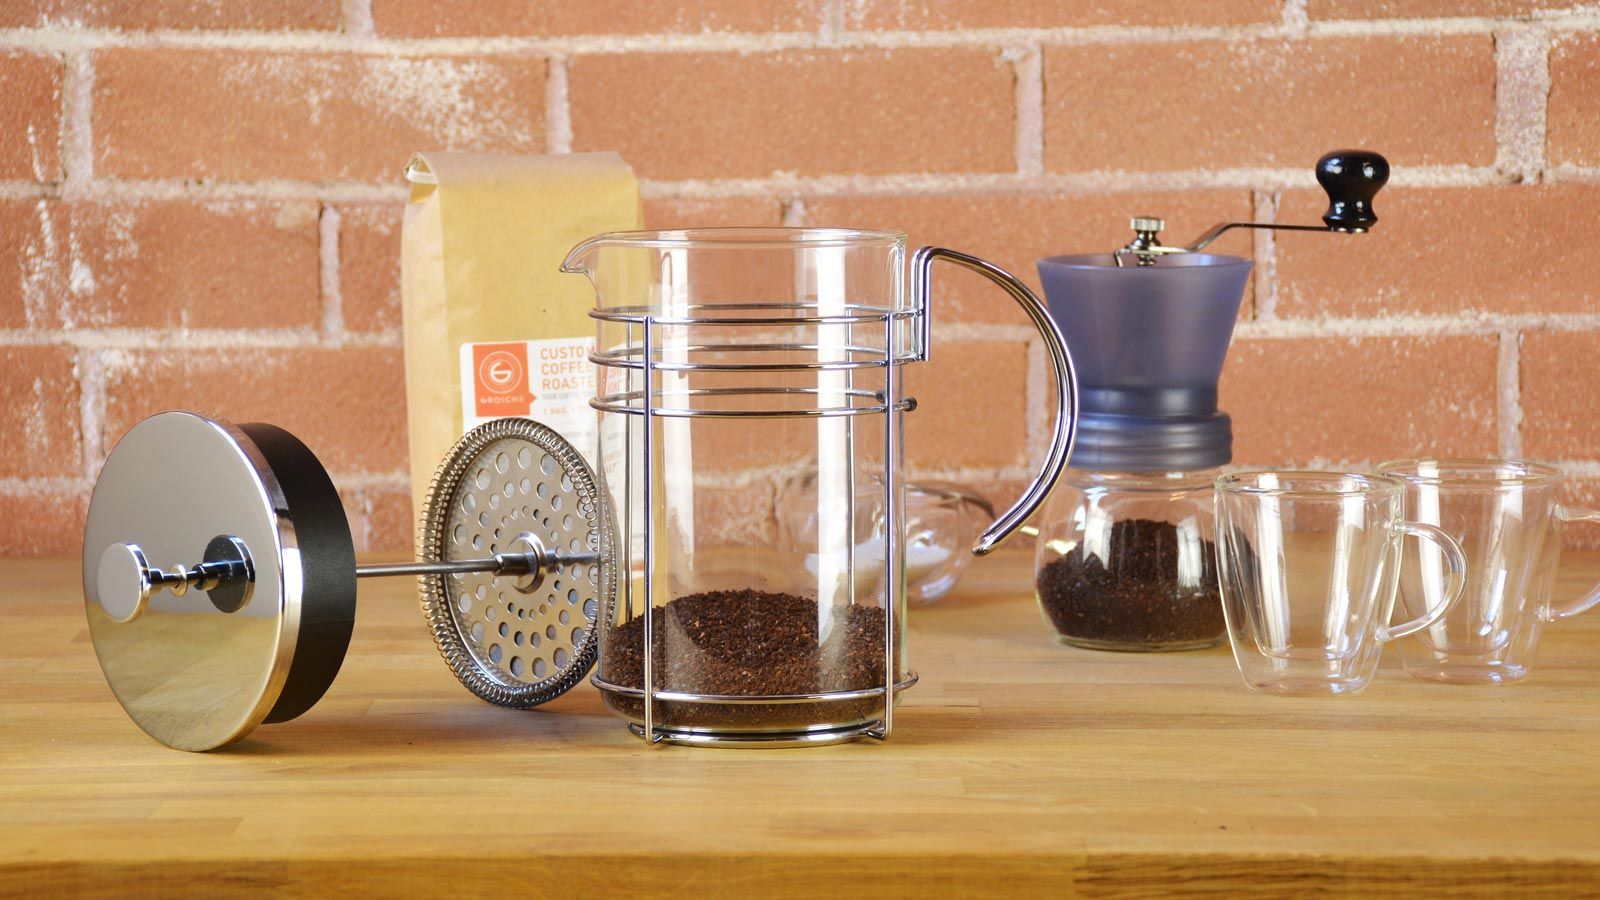 Pour Over vs French Press Coffee- Which one's better?